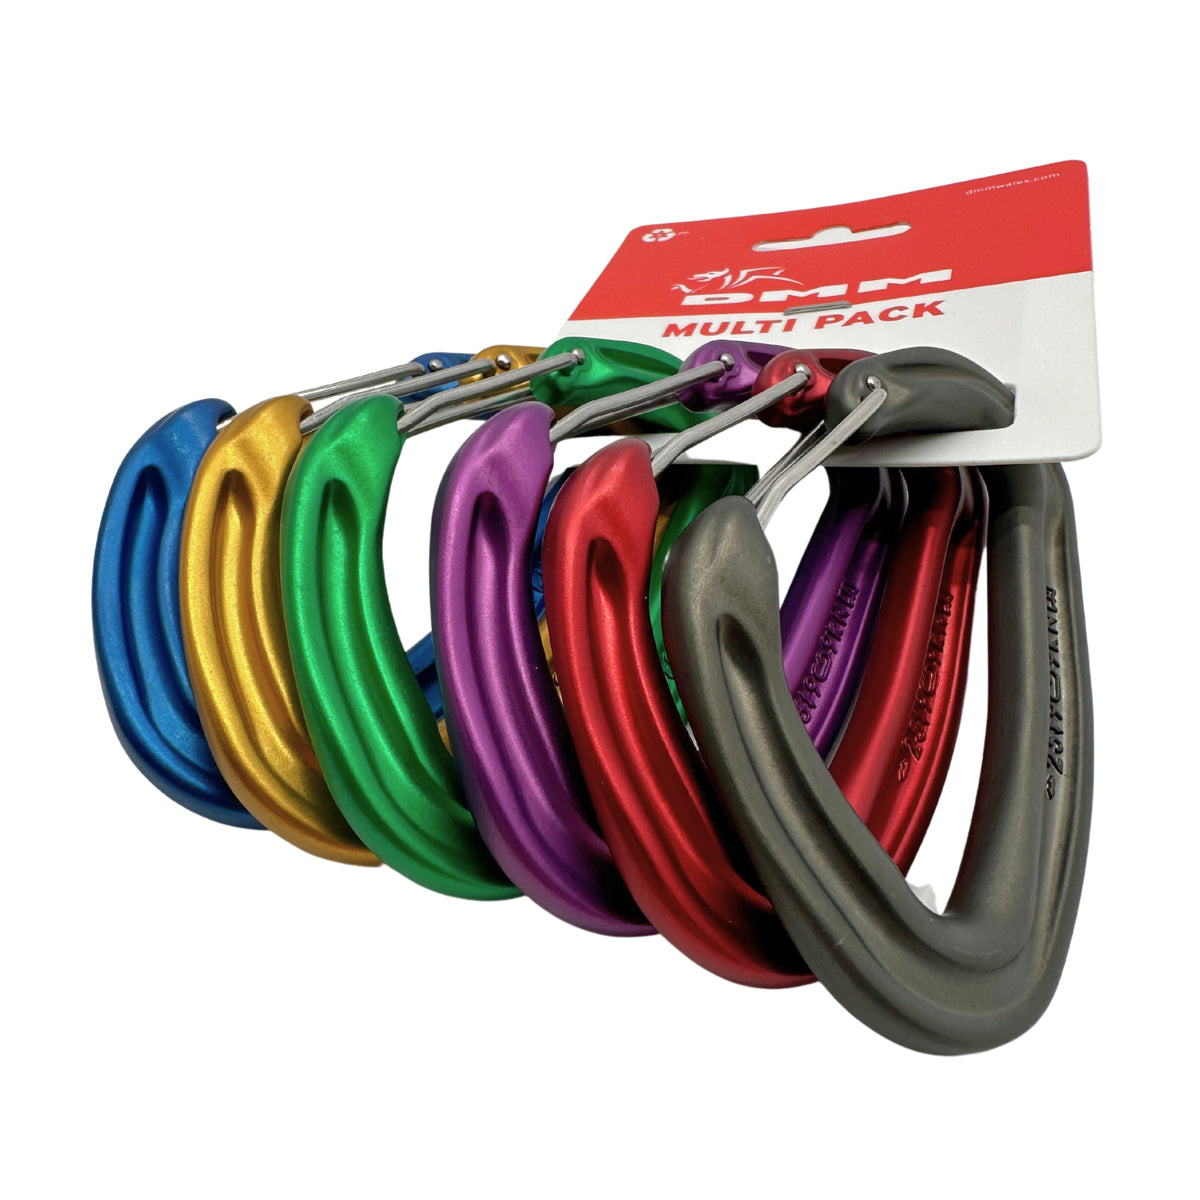 DMM Alpha Wire Coloured 6-Pack